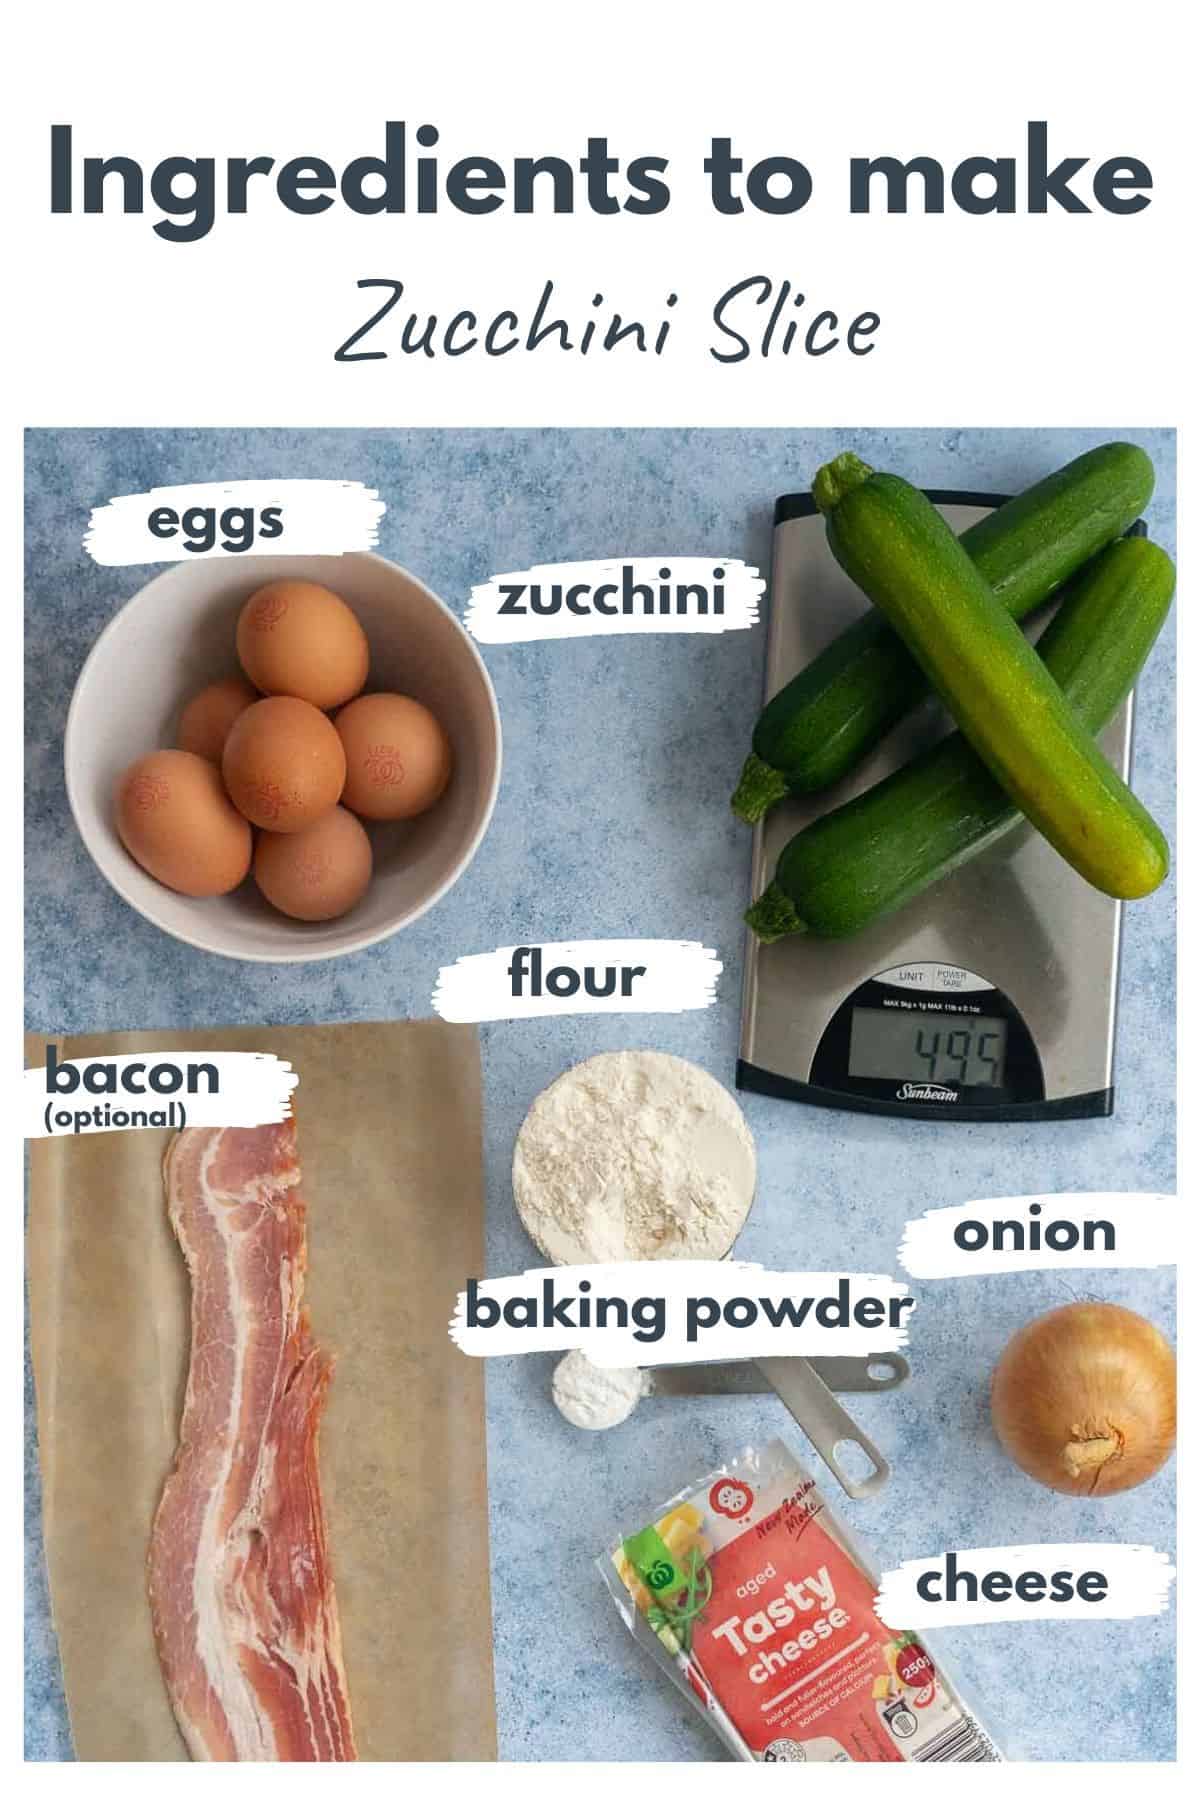 ingredients for zucchini slice laid out on a blue bench top with text overlay